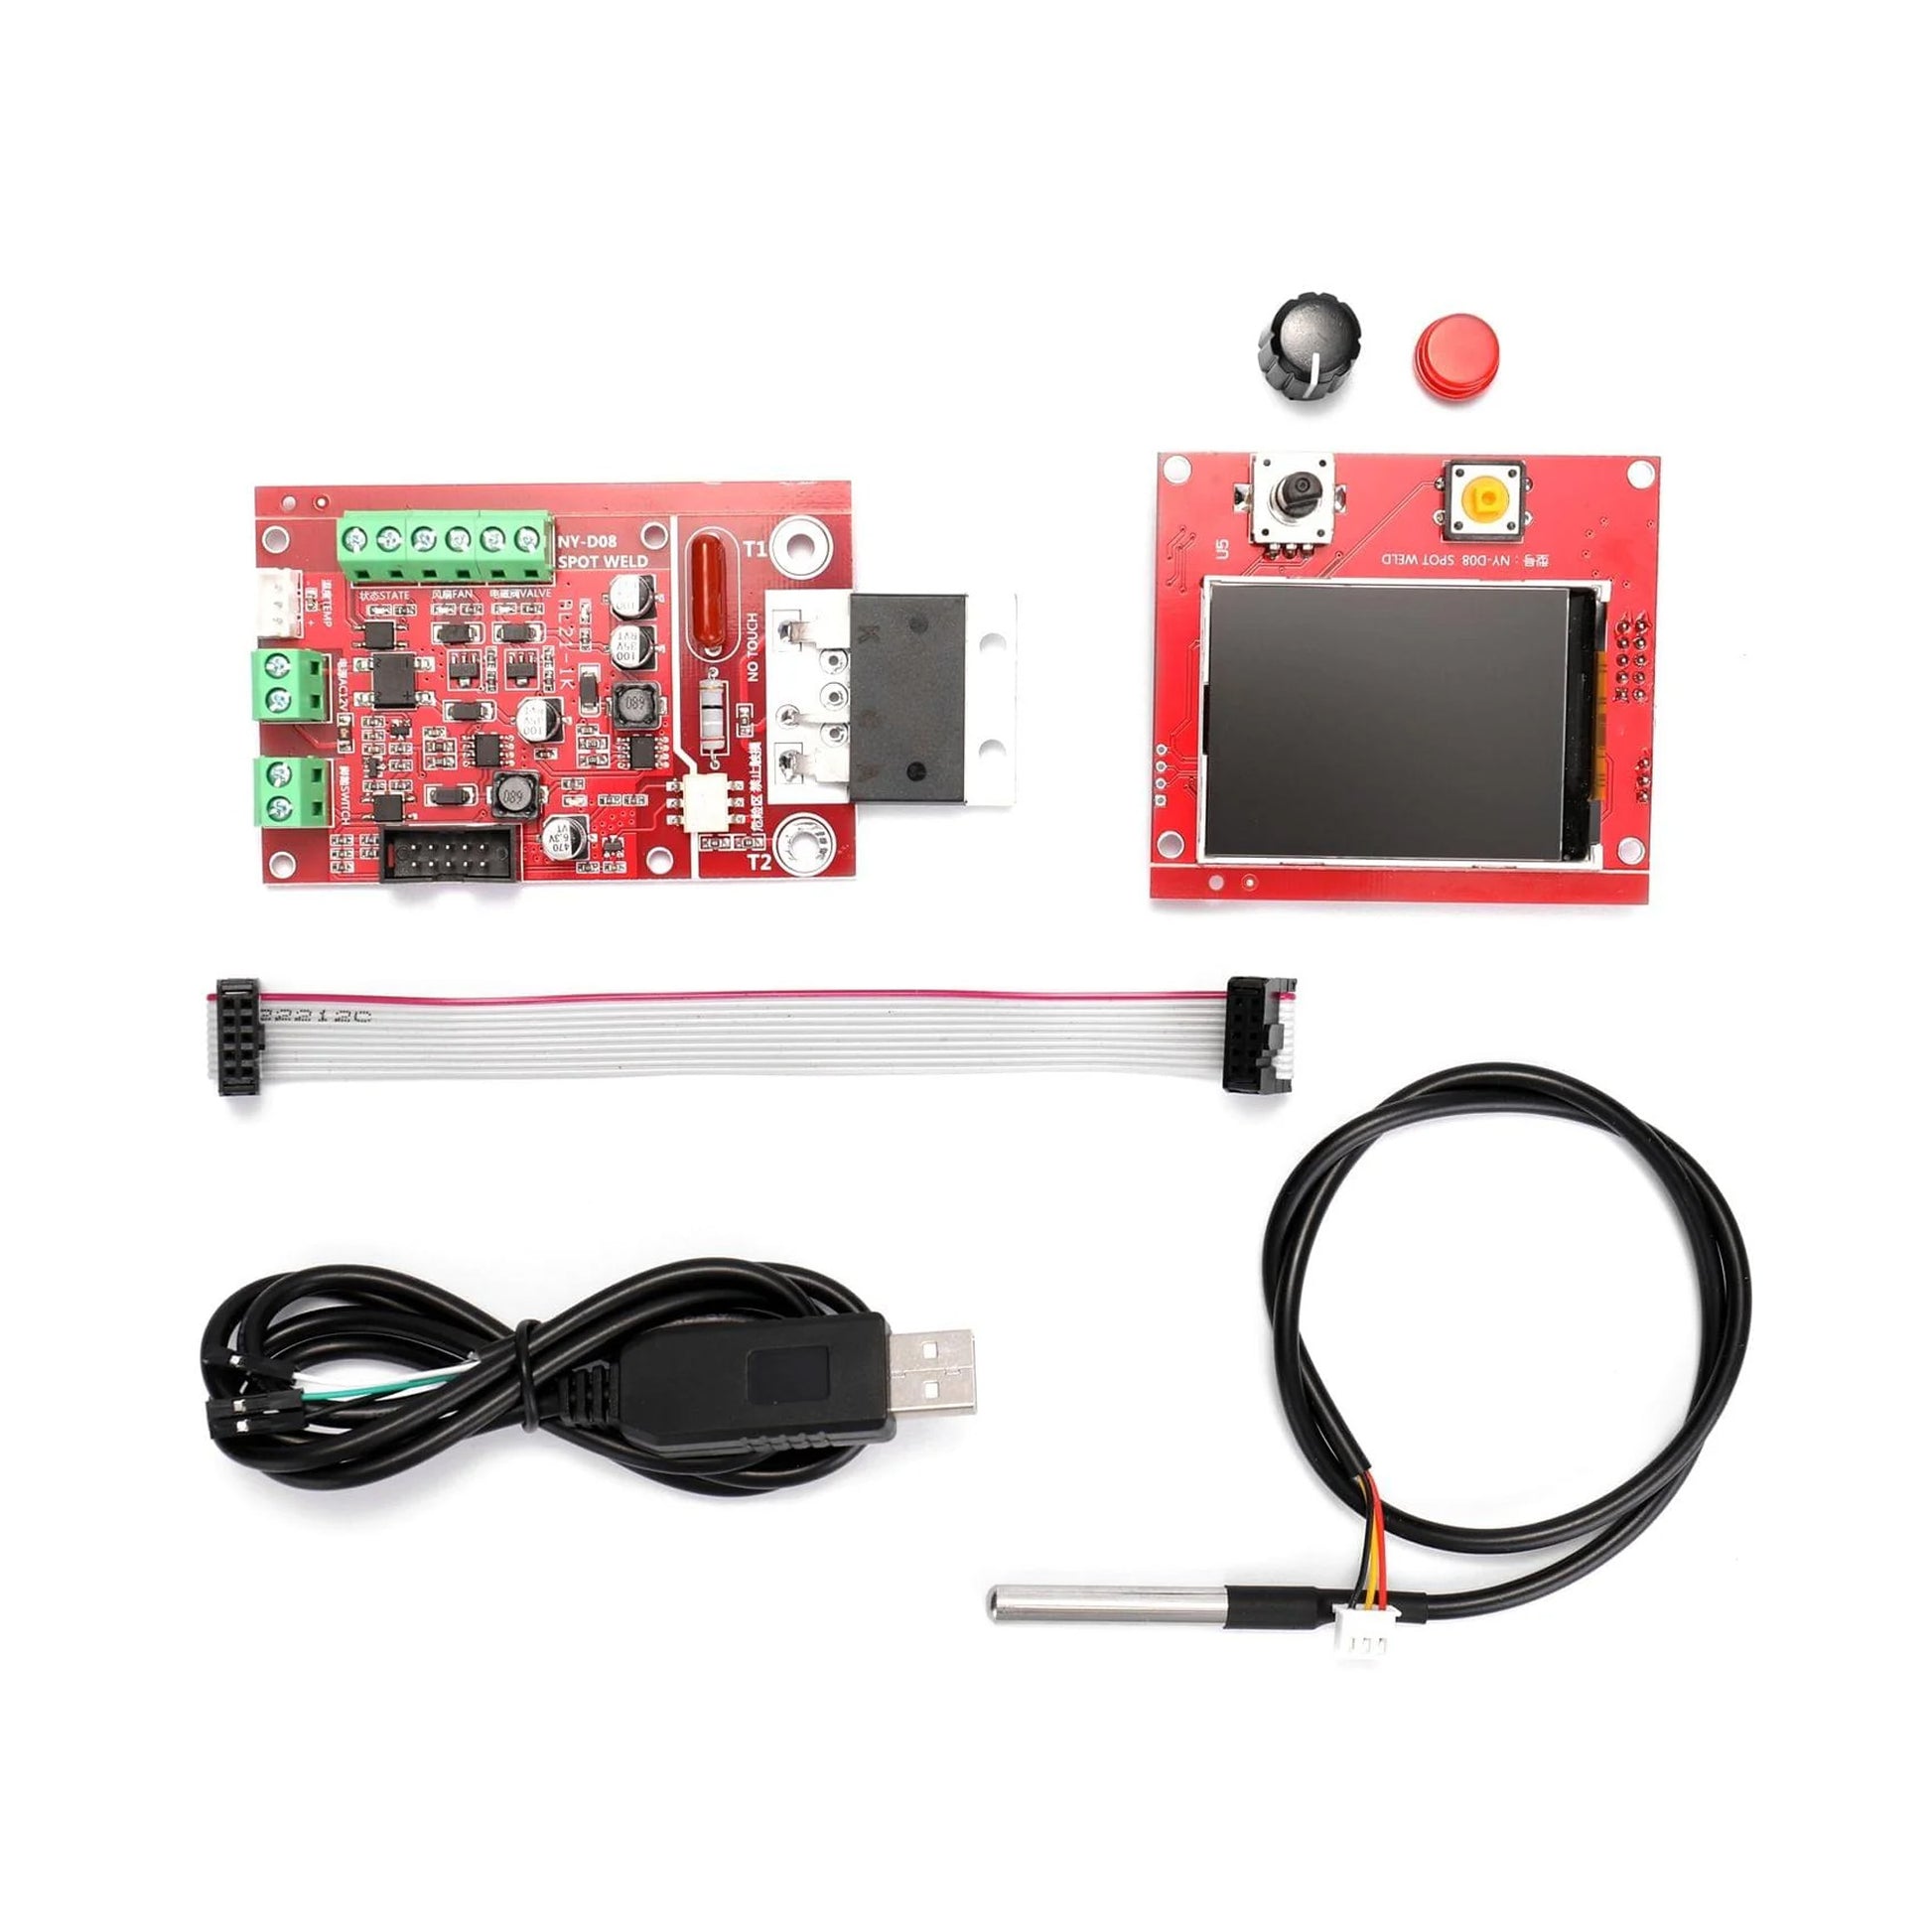 NY-D08 100A Spot Welder Controller Welding Machine Pneumatic Color LCD Display Multi-point Personalization with Temperature Sensor - RS2751 - REES52